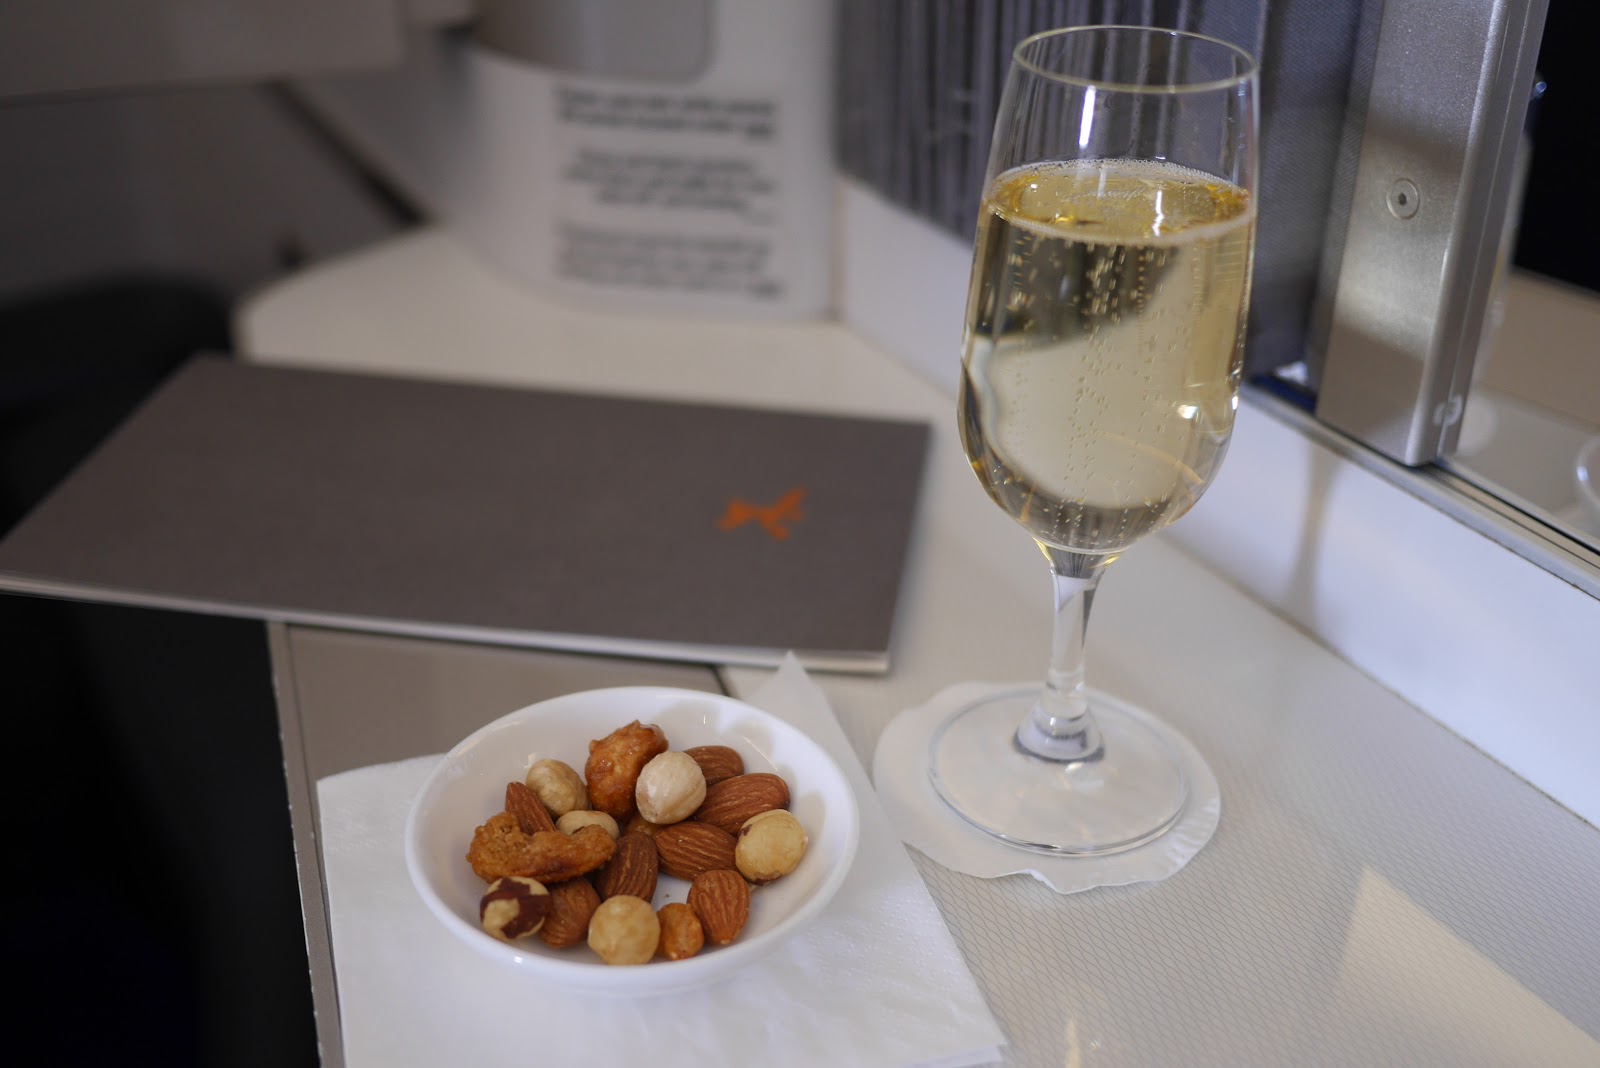 Review of British Airways First Class flight from London Gatwick in 2018 by www.CalMcTravels.com